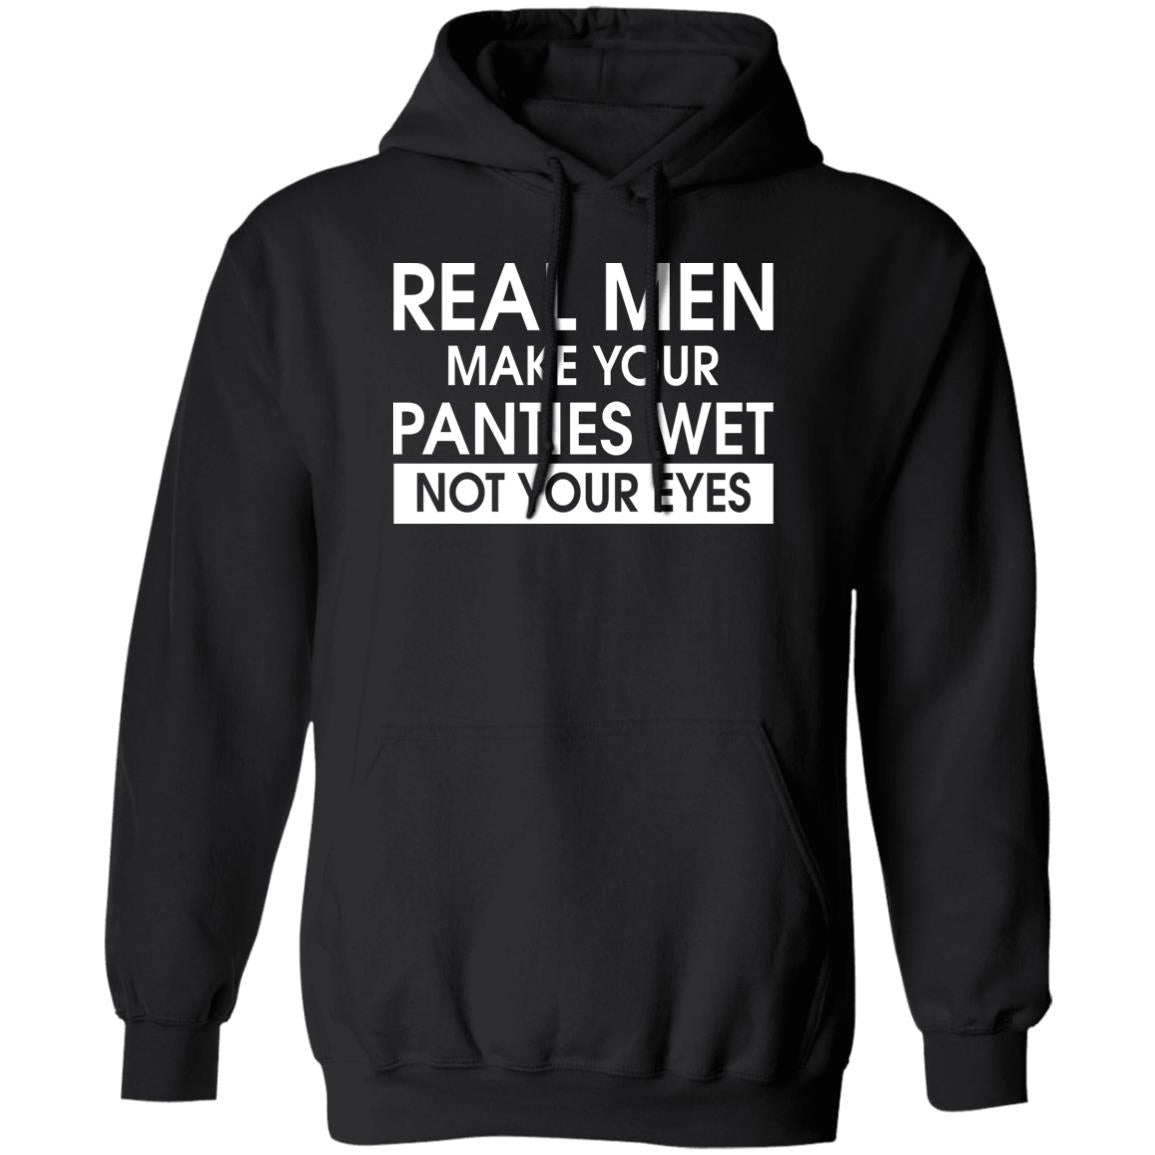 Real Men Make Your Panties Wet Not Your Eyes v3 - Stylish Su - Inspire  Uplift